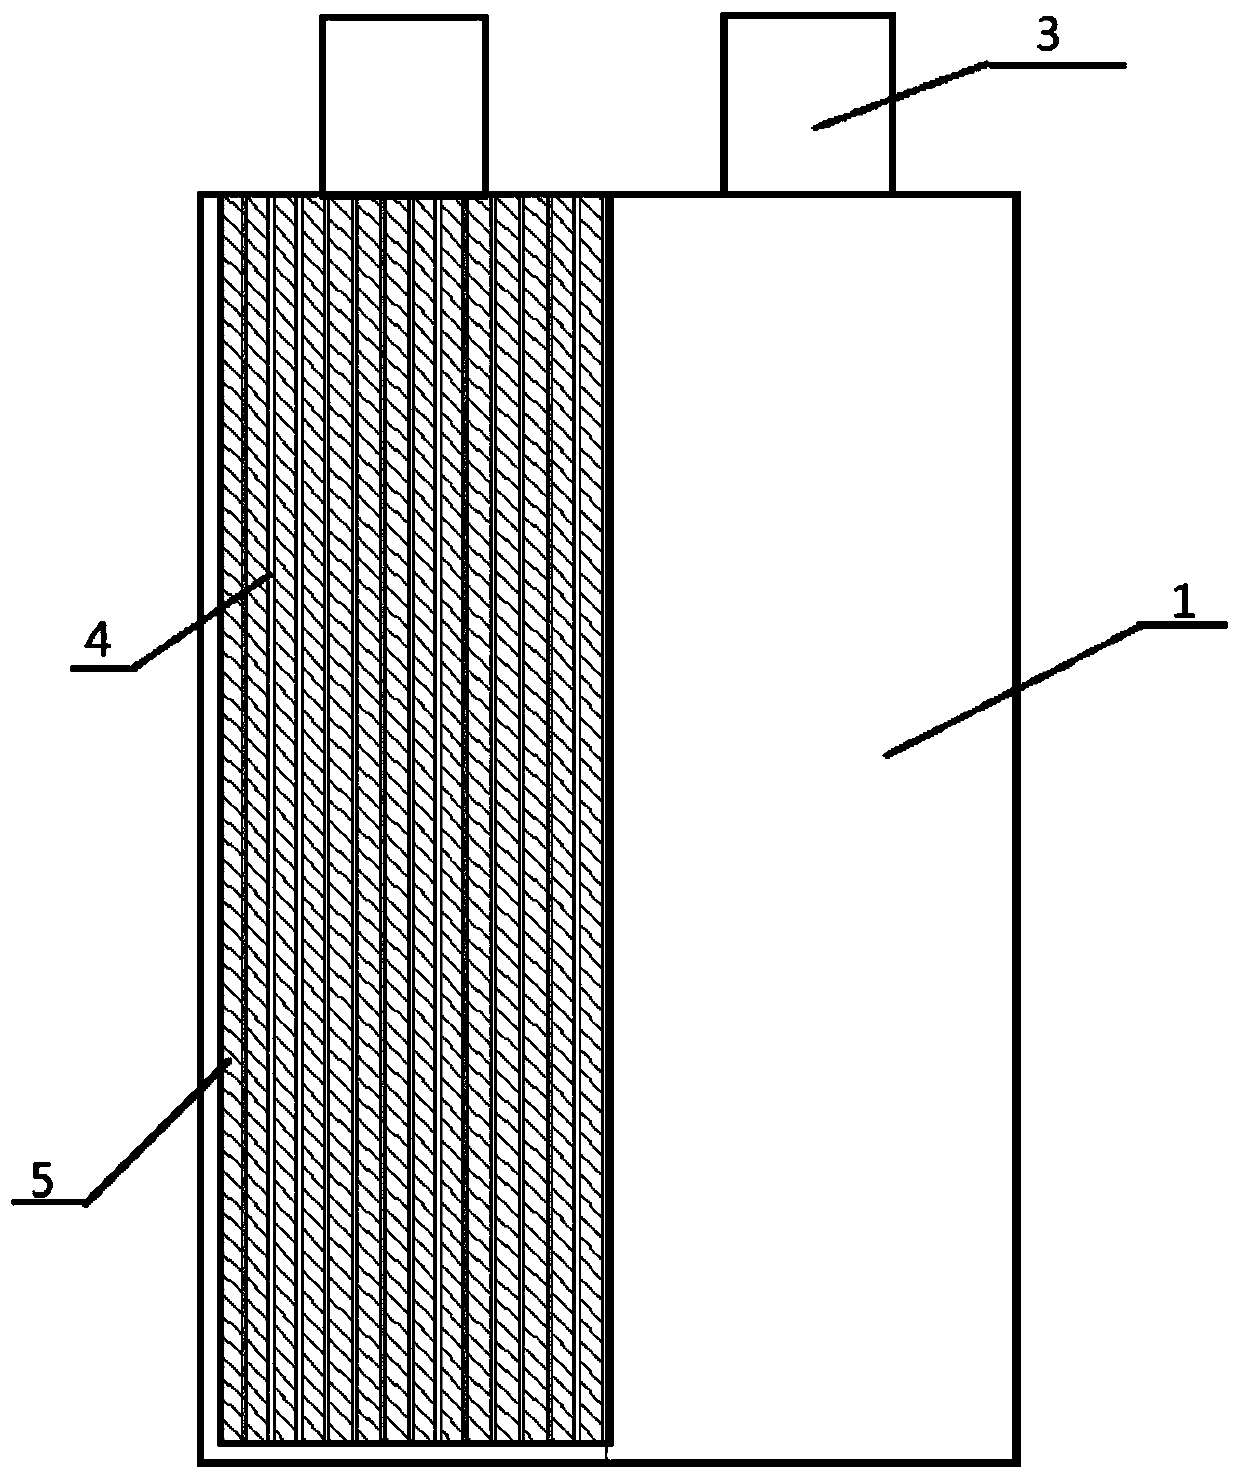 Lithium ion battery module thermal management system based on phase change material- fin composite structure